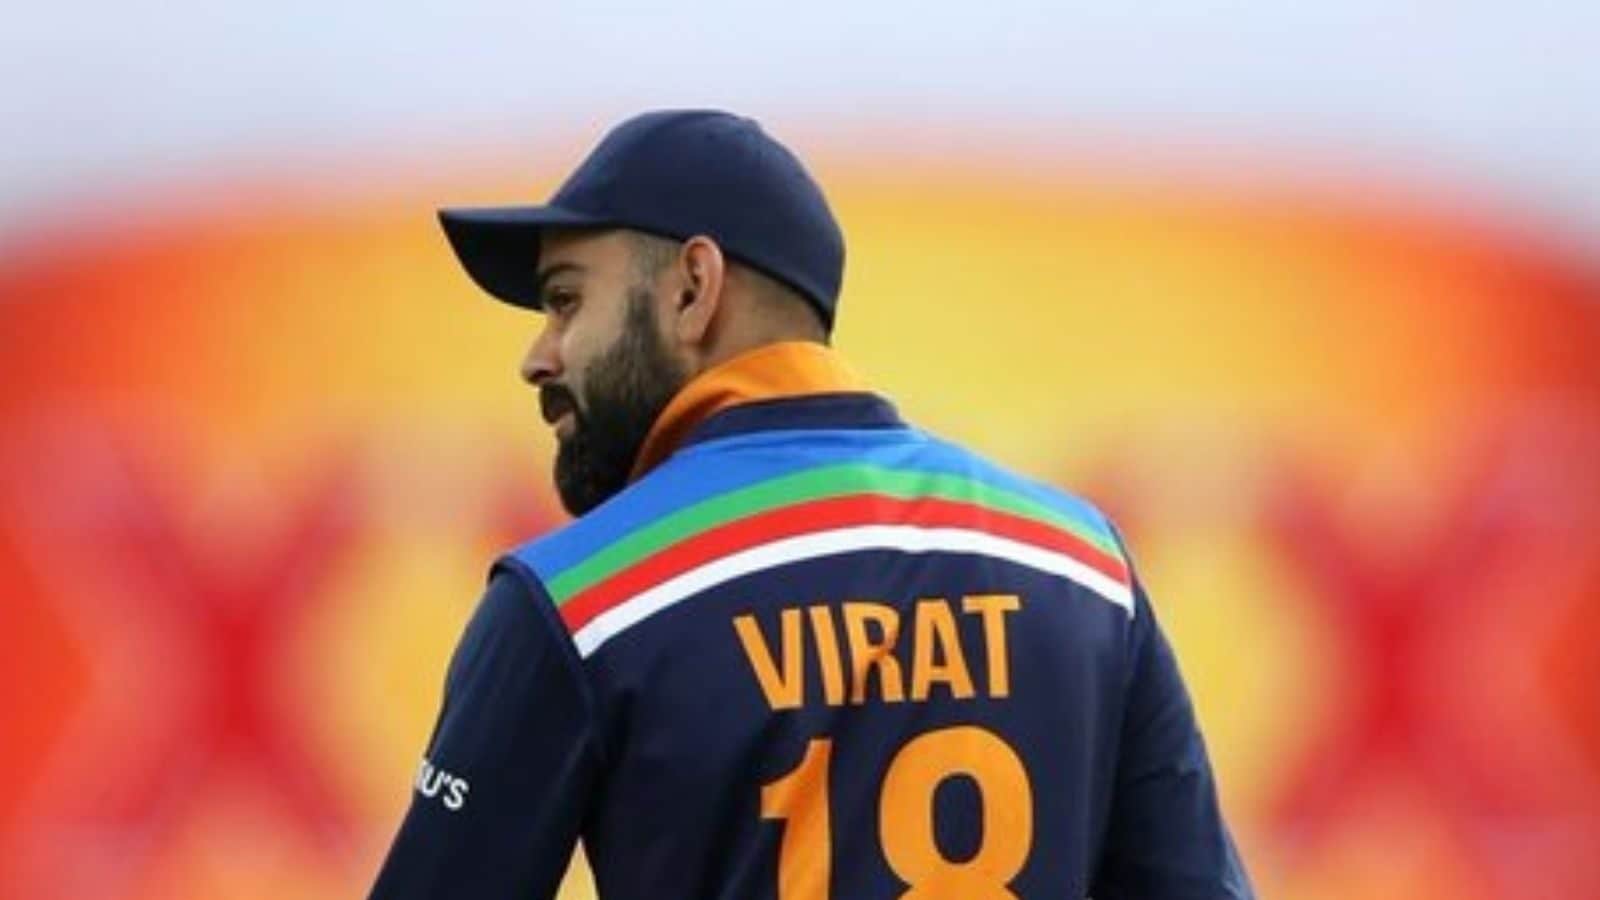 Order ice cream from bhabhi's phone': Virat Kohli gets witty reply from  Zomato after losing his new phone